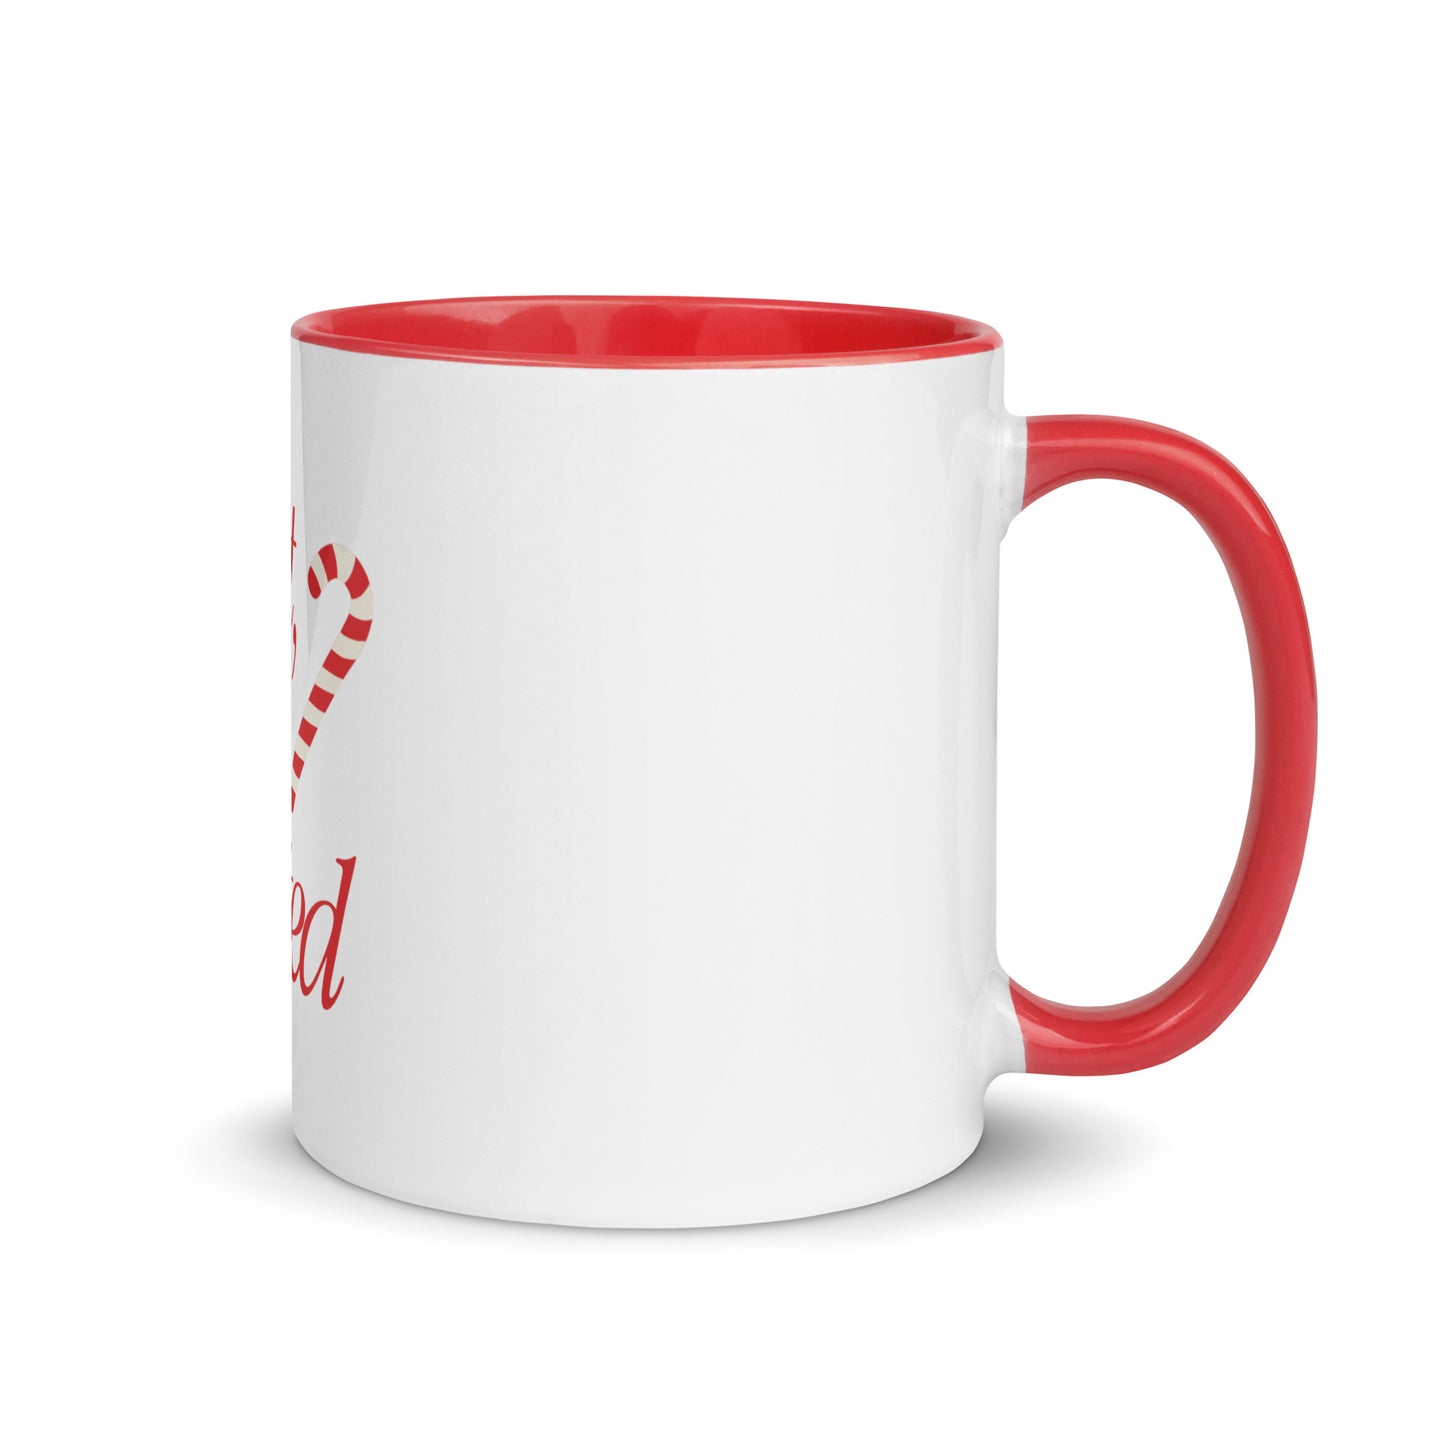 'Sweet, but Twisted' Mug - Candy Red